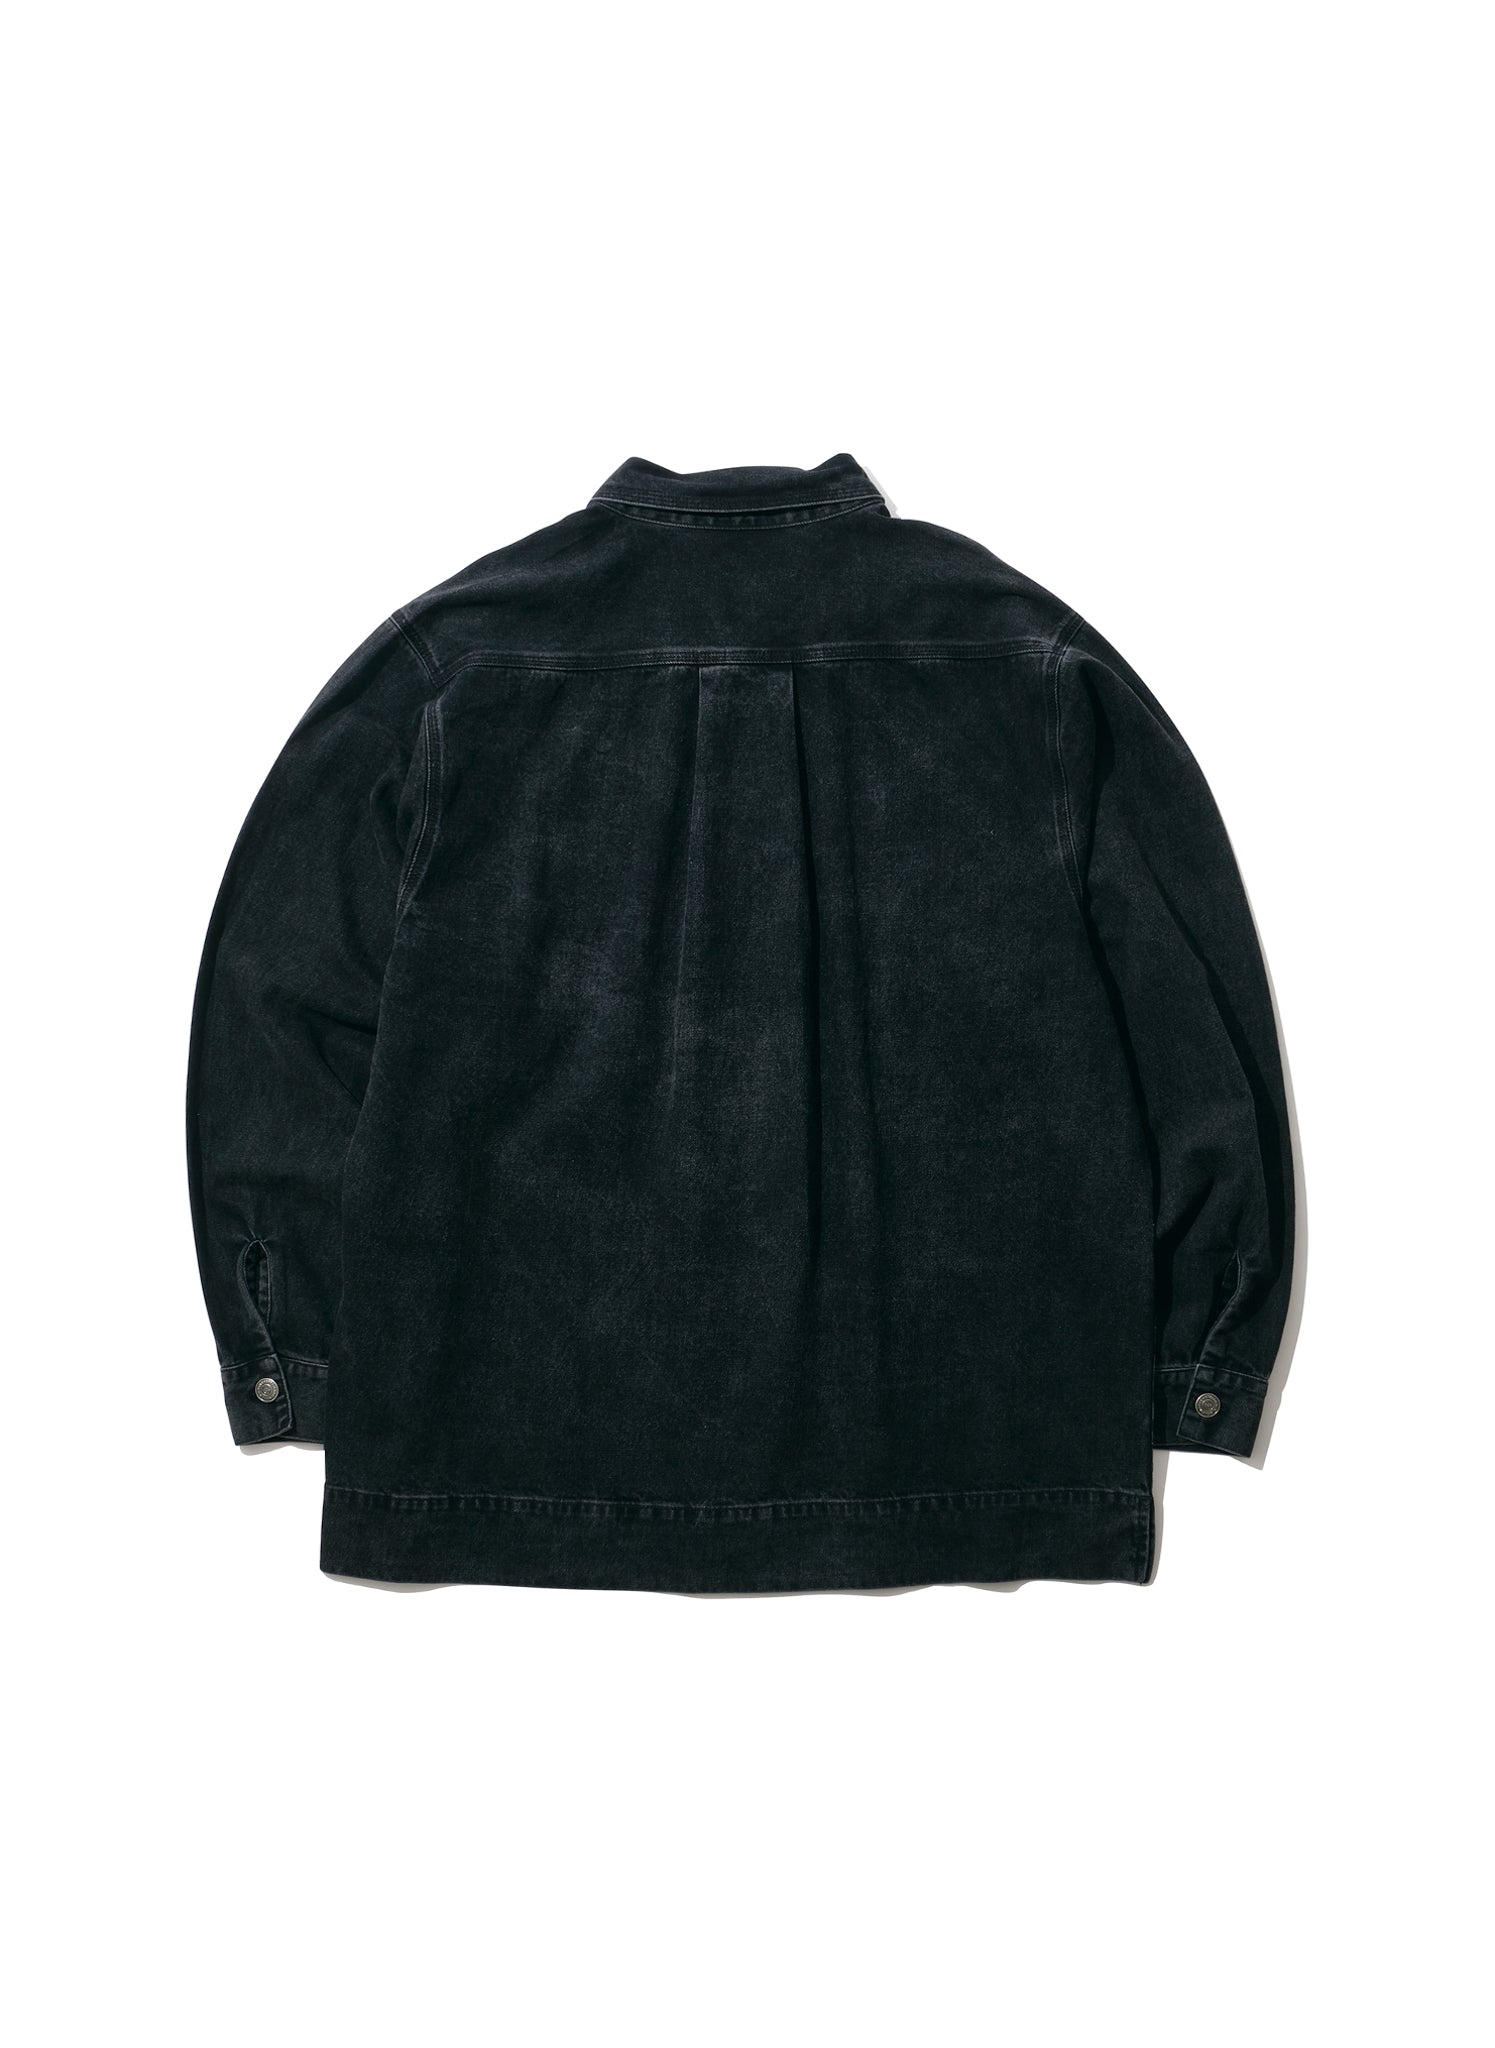 WILLY CHAVARRIA / ZIP PLACKET LS SHIRT WASHED BLACK